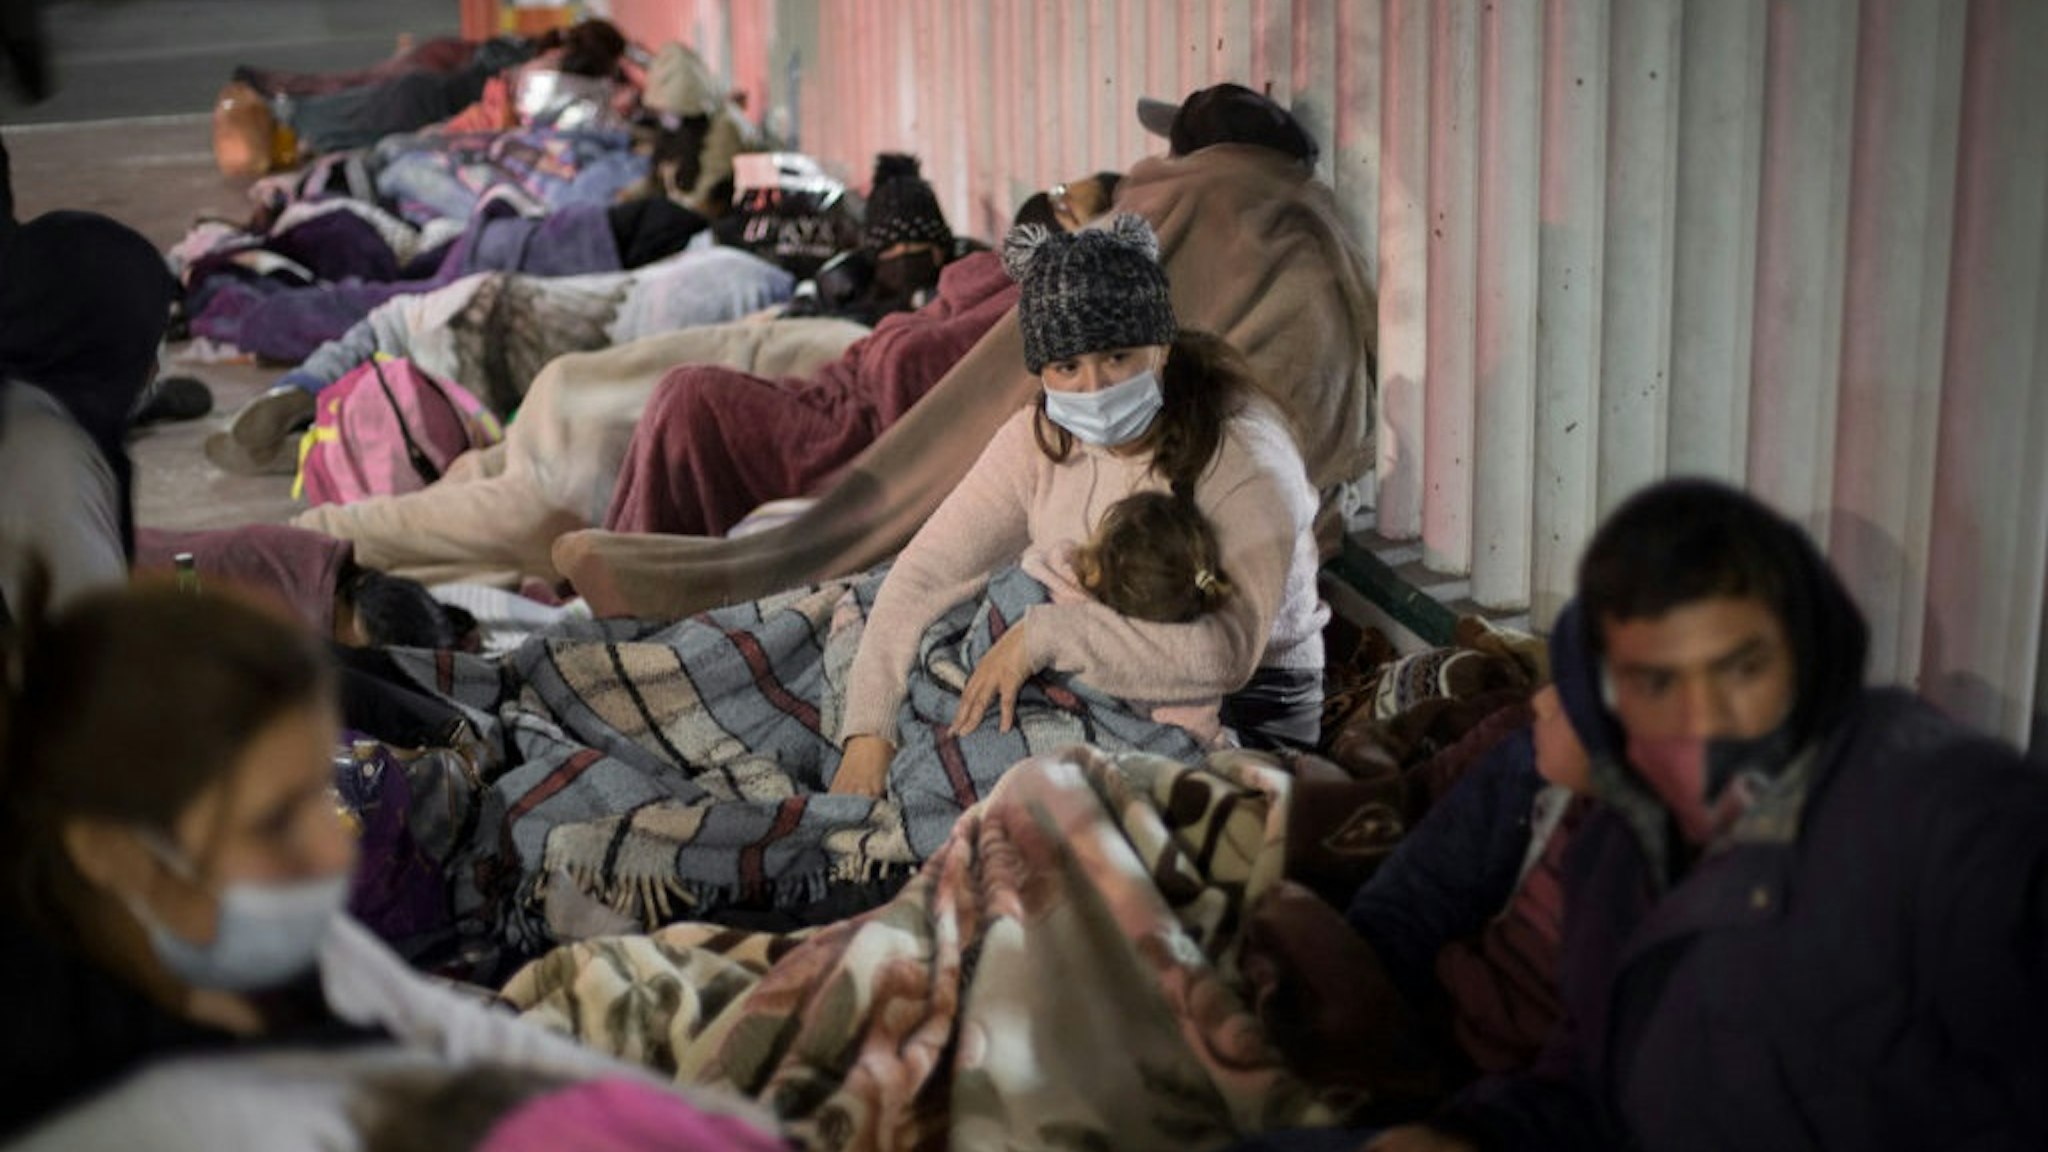 19 February 2021, Mexico, Tijuana: Dozens of migrants of Central American and Mexican origin sleep on the esplanade of the National Institute of Migration near the El Chaparral border crossing, waiting for U.S. authorities to let them enter to begin their humanitarian asylum process in this country.